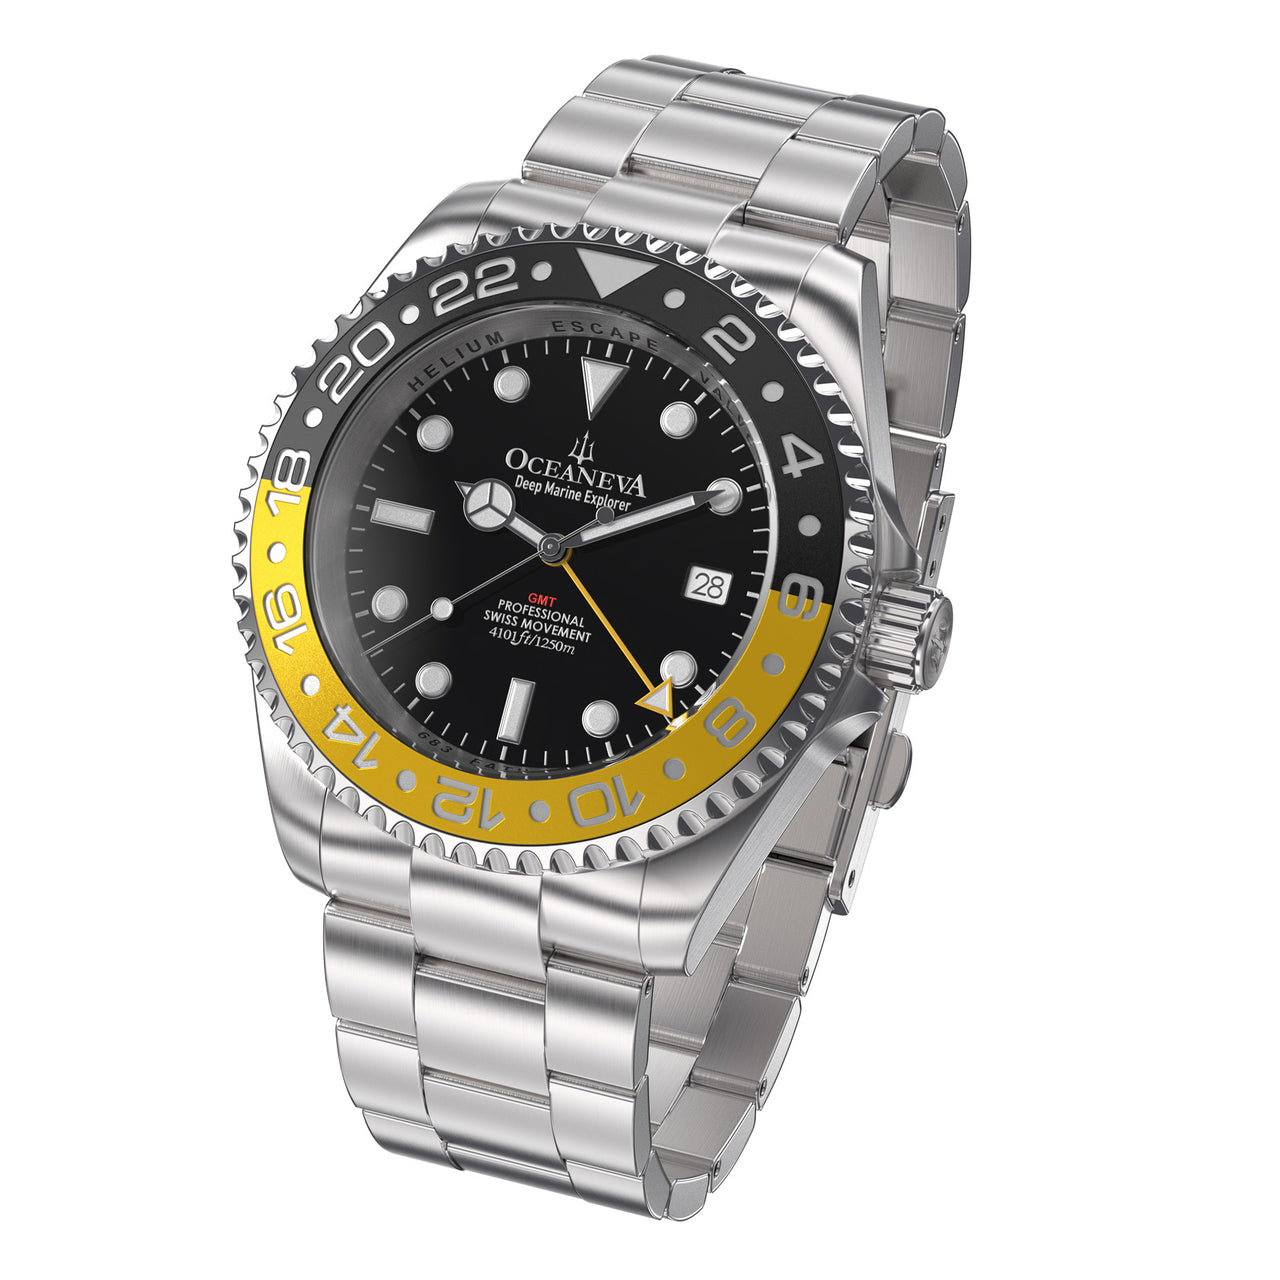 Oceaneva 1250M GMT Dive Watch Black And Yellow Front Picture Slight Left Slant View